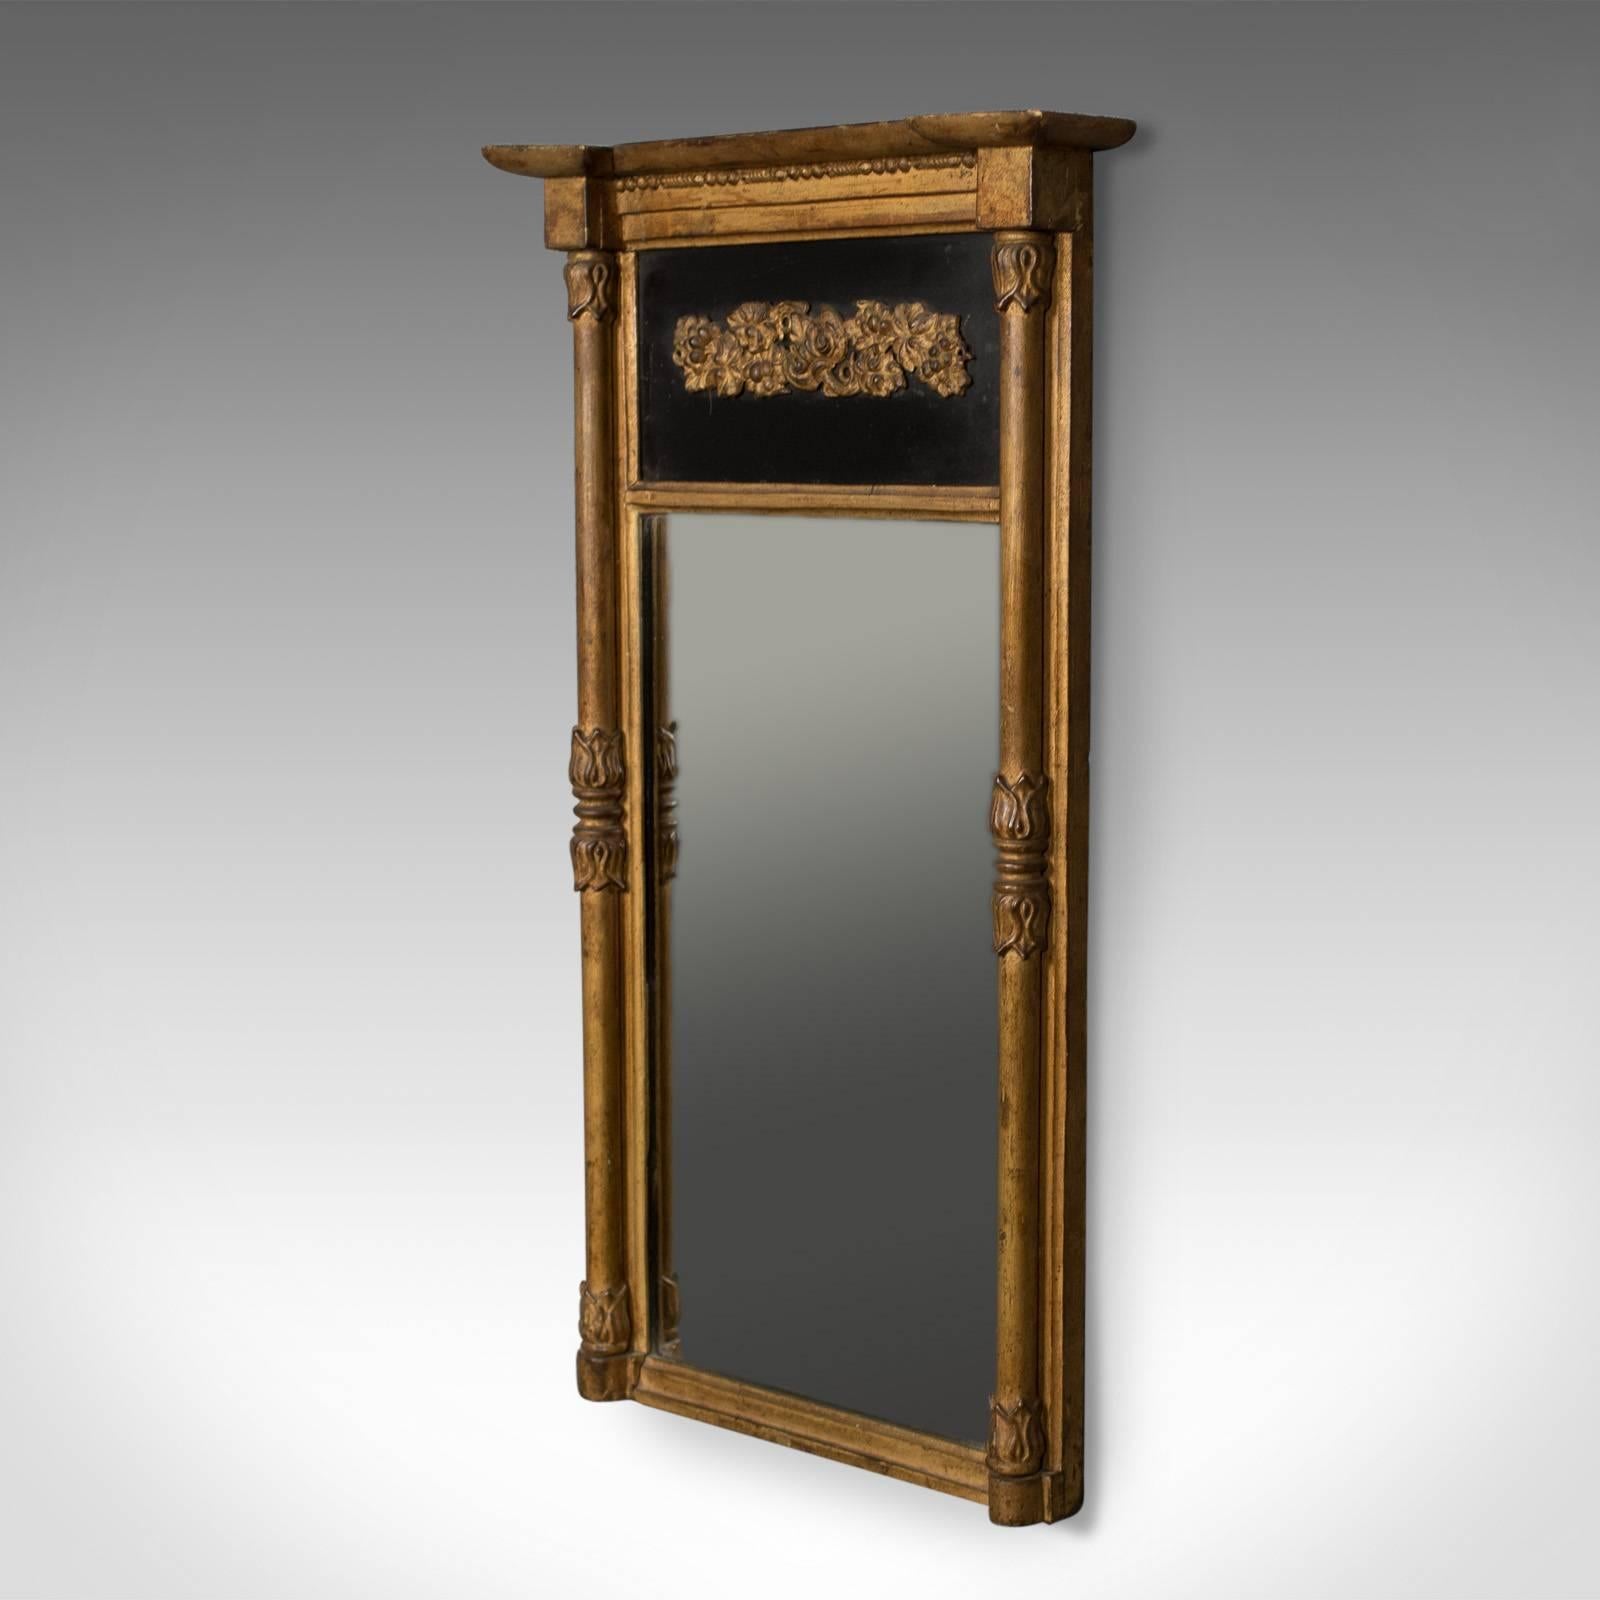 This is a Regency antique pier mirror in giltwood and gesso dating to the early 19th century, circa 1820.

Highly desirable natural color and patina to the giltwood frame
Superb proportions in classical form
Striking, contrasting, ebonized